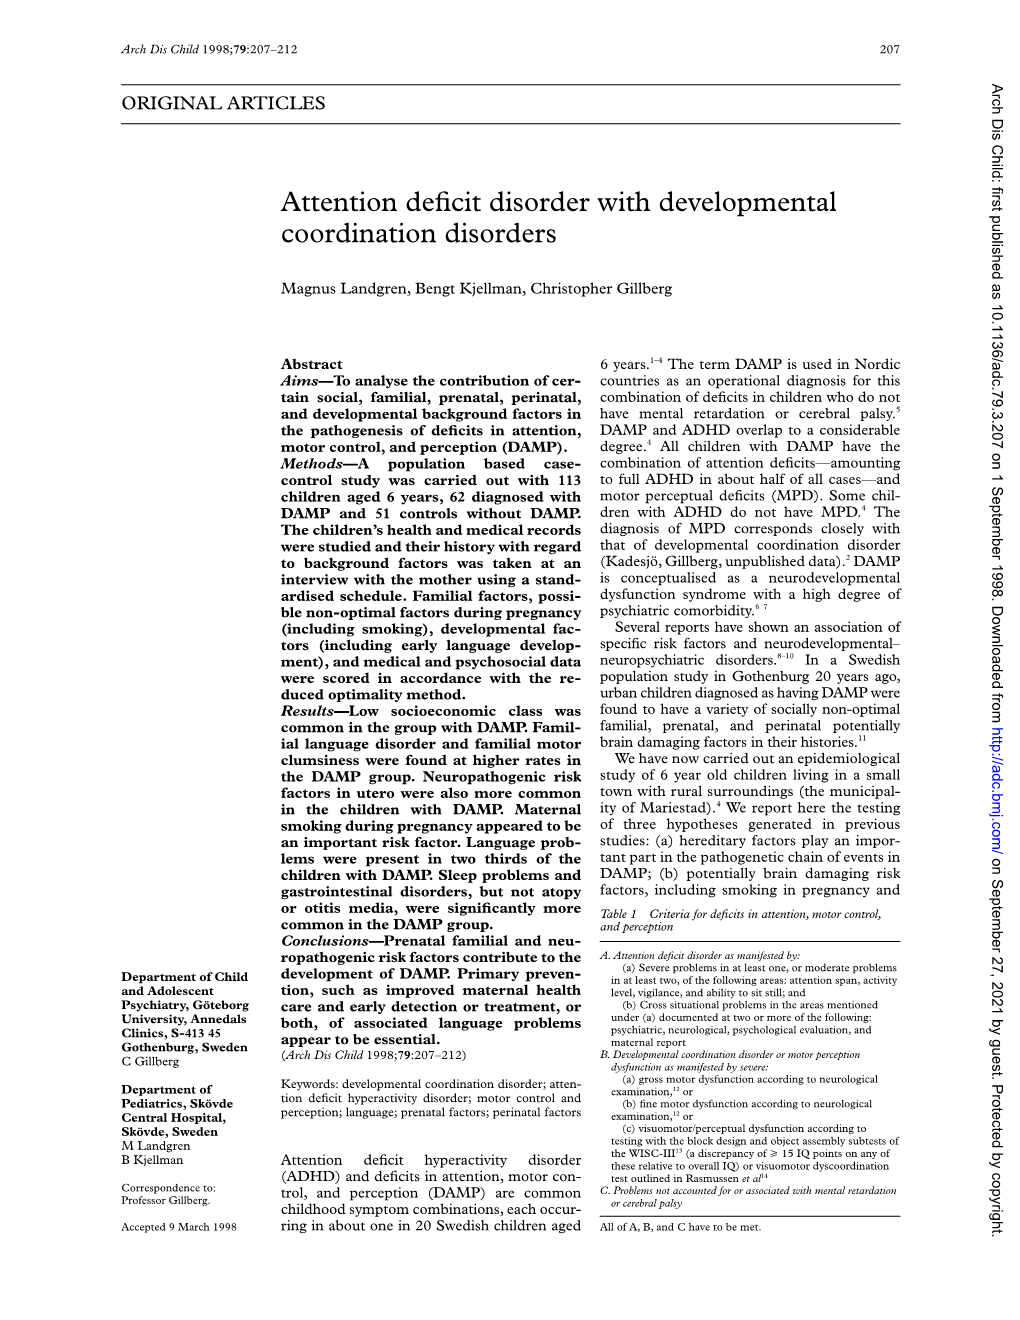 Attention Deficit Disorder with Developmental Coordination Disorders